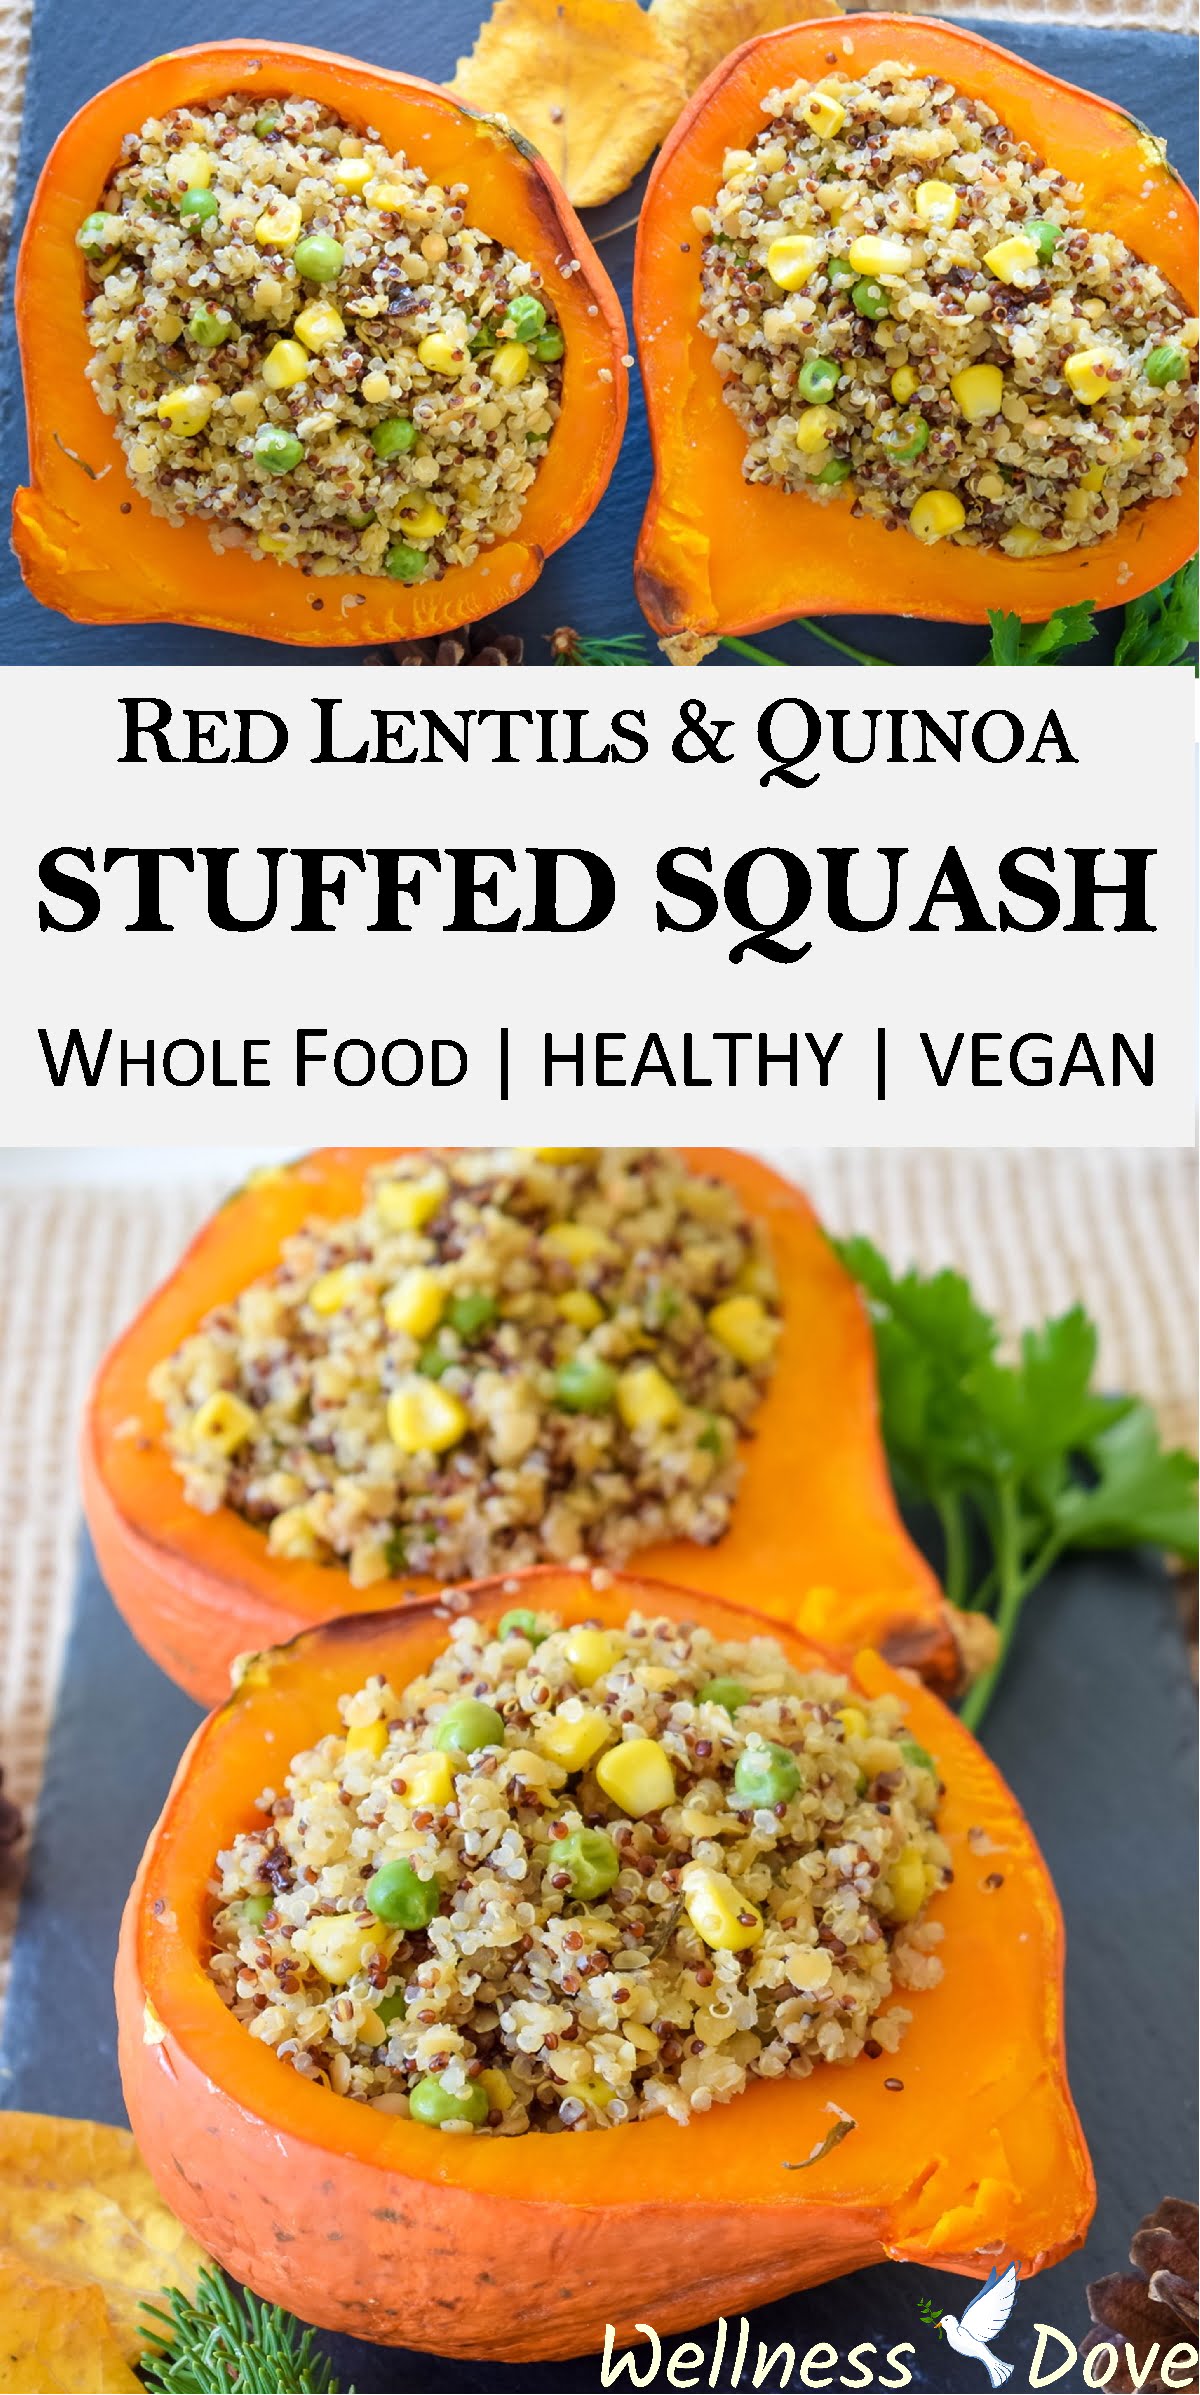 A delicious and easy stuffed squash recipe!Only whole plant food ingredients, without any oil for superb health and weight.The rich, sweet flavor of the squash pairs perfectly with the slightly sour taste of the sun-dried tomatoes. A surprising and really tasty combination, really satiating with the quinoa.